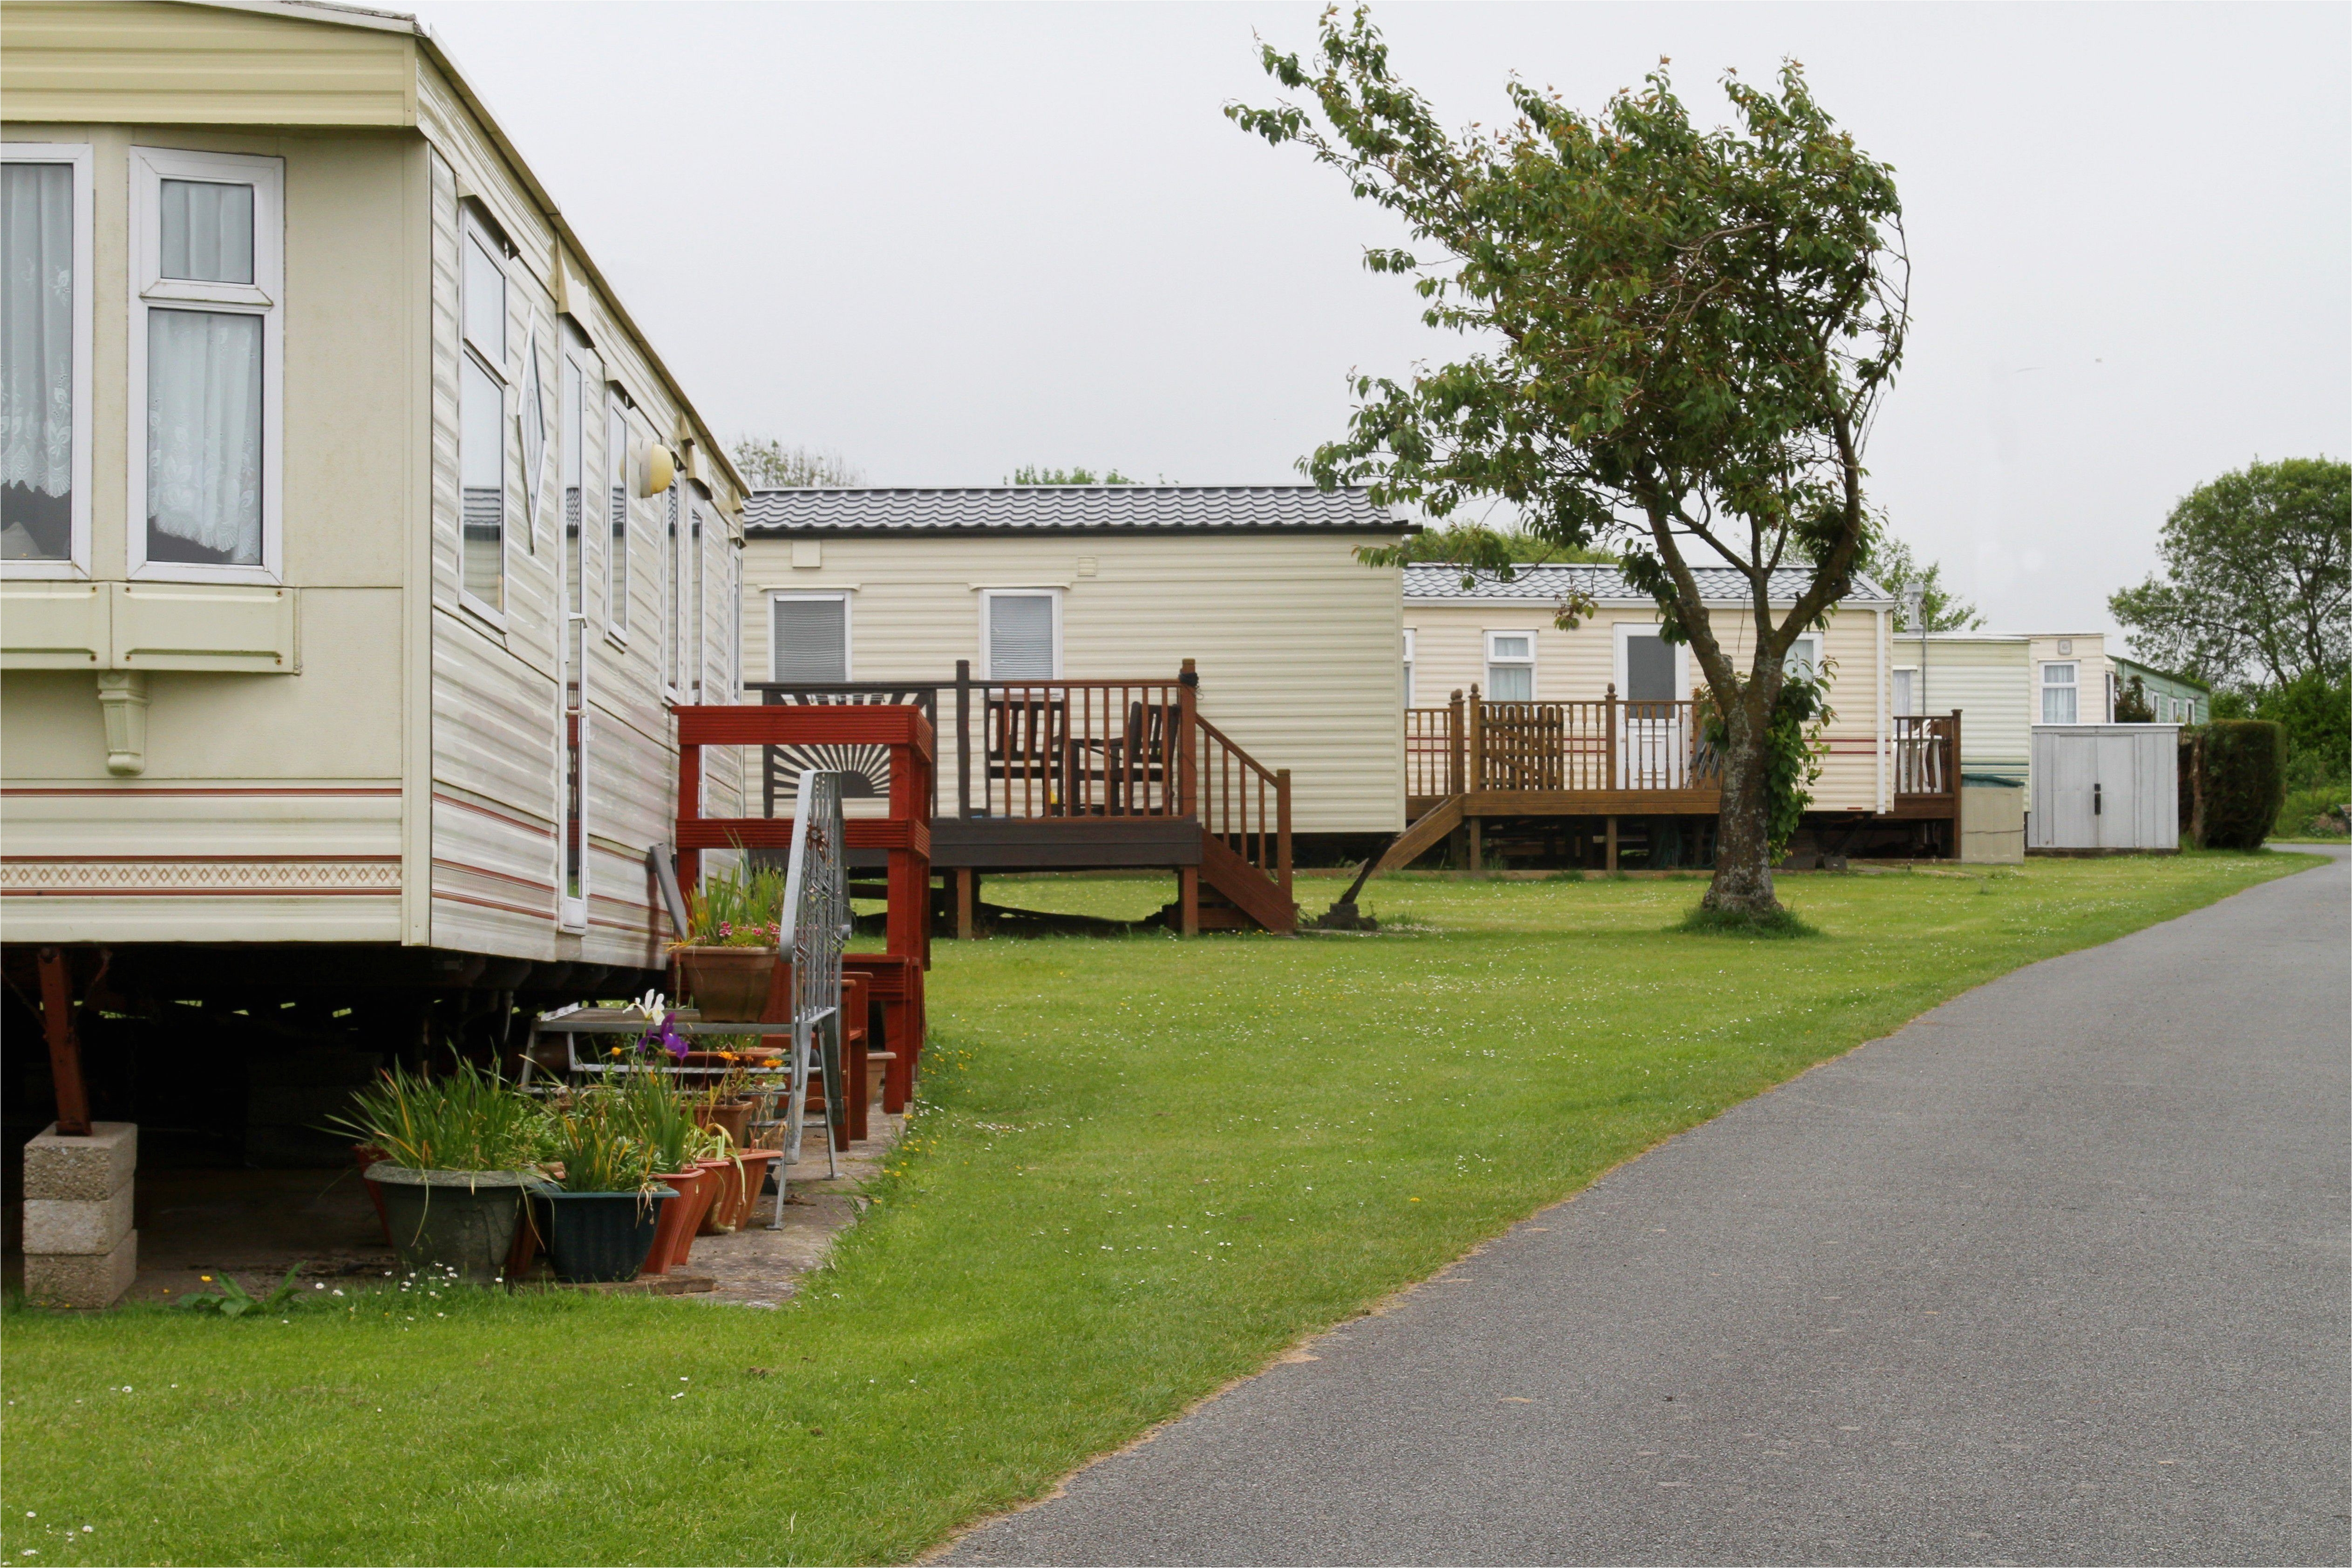 mobile caravans or trailers in holiday park 691672962 5aef9e13ff1b7800365e7767